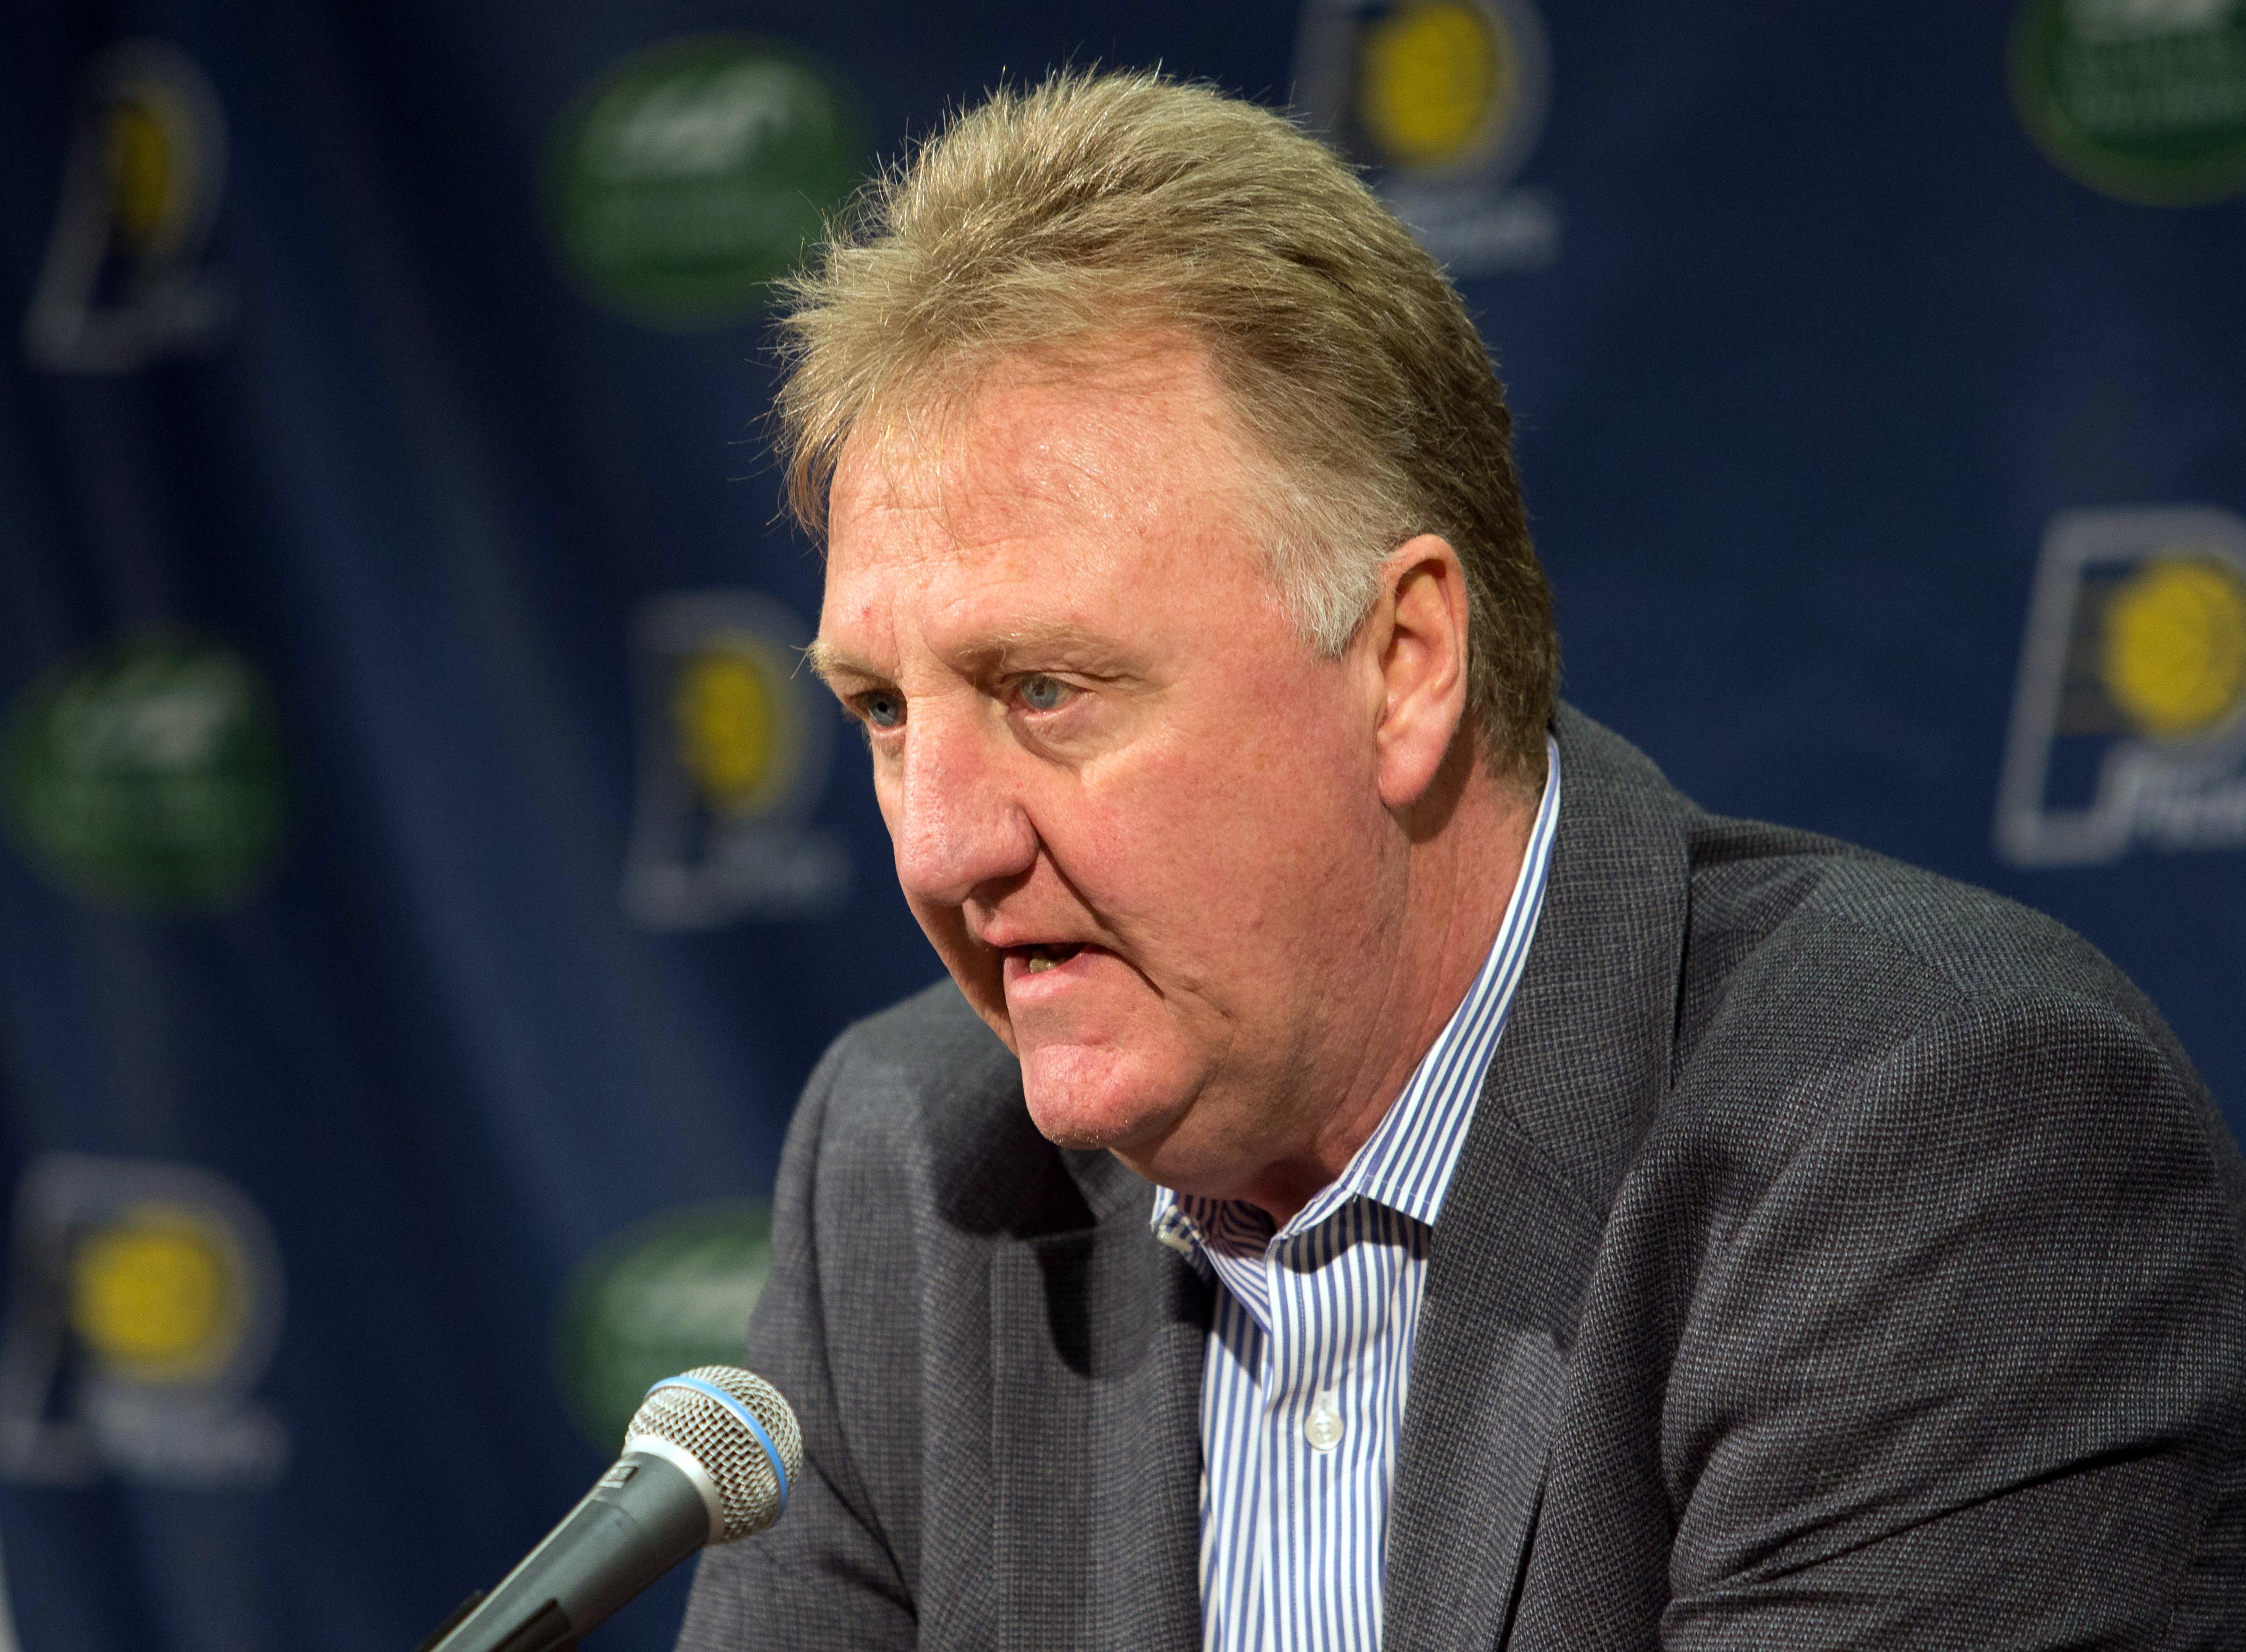 Larry Bird Q&A: "We want to keep Paul George"